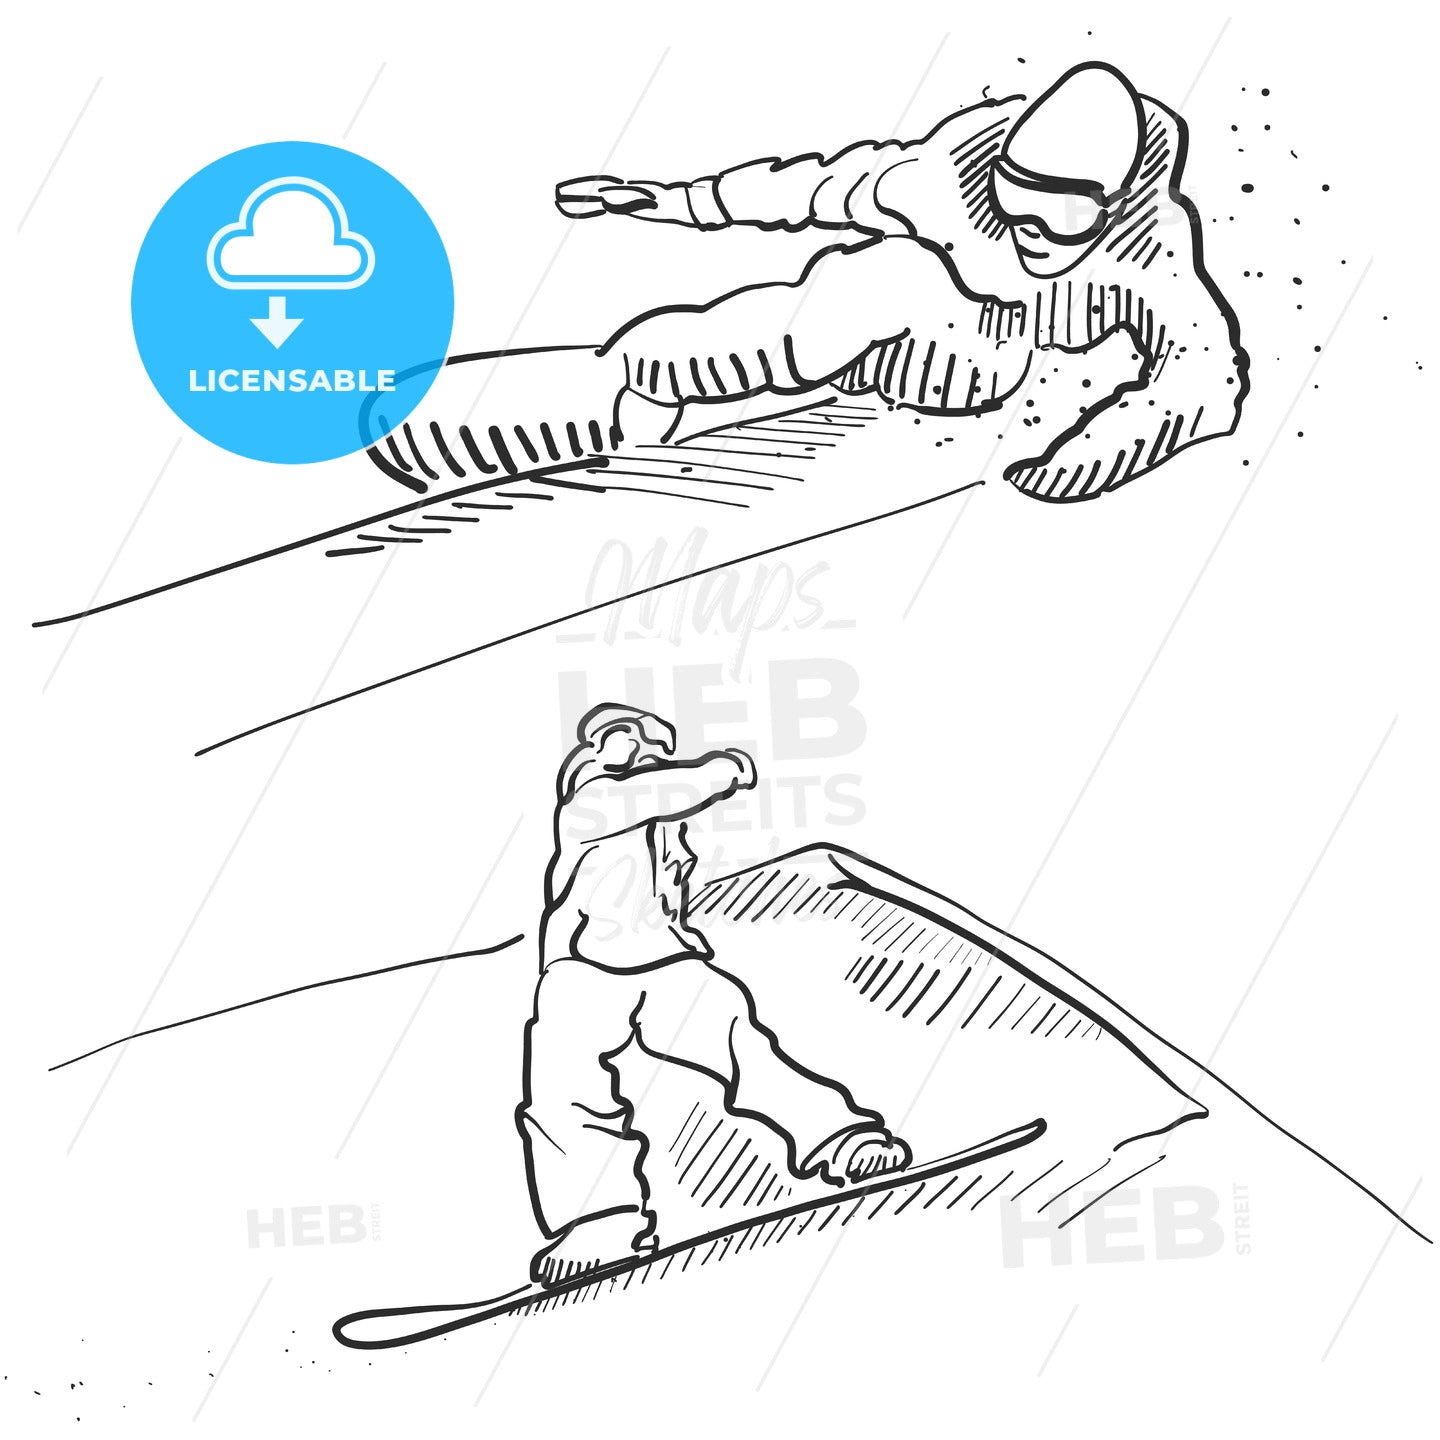 Two Snowboarder Jumping Situation Sketches – instant download